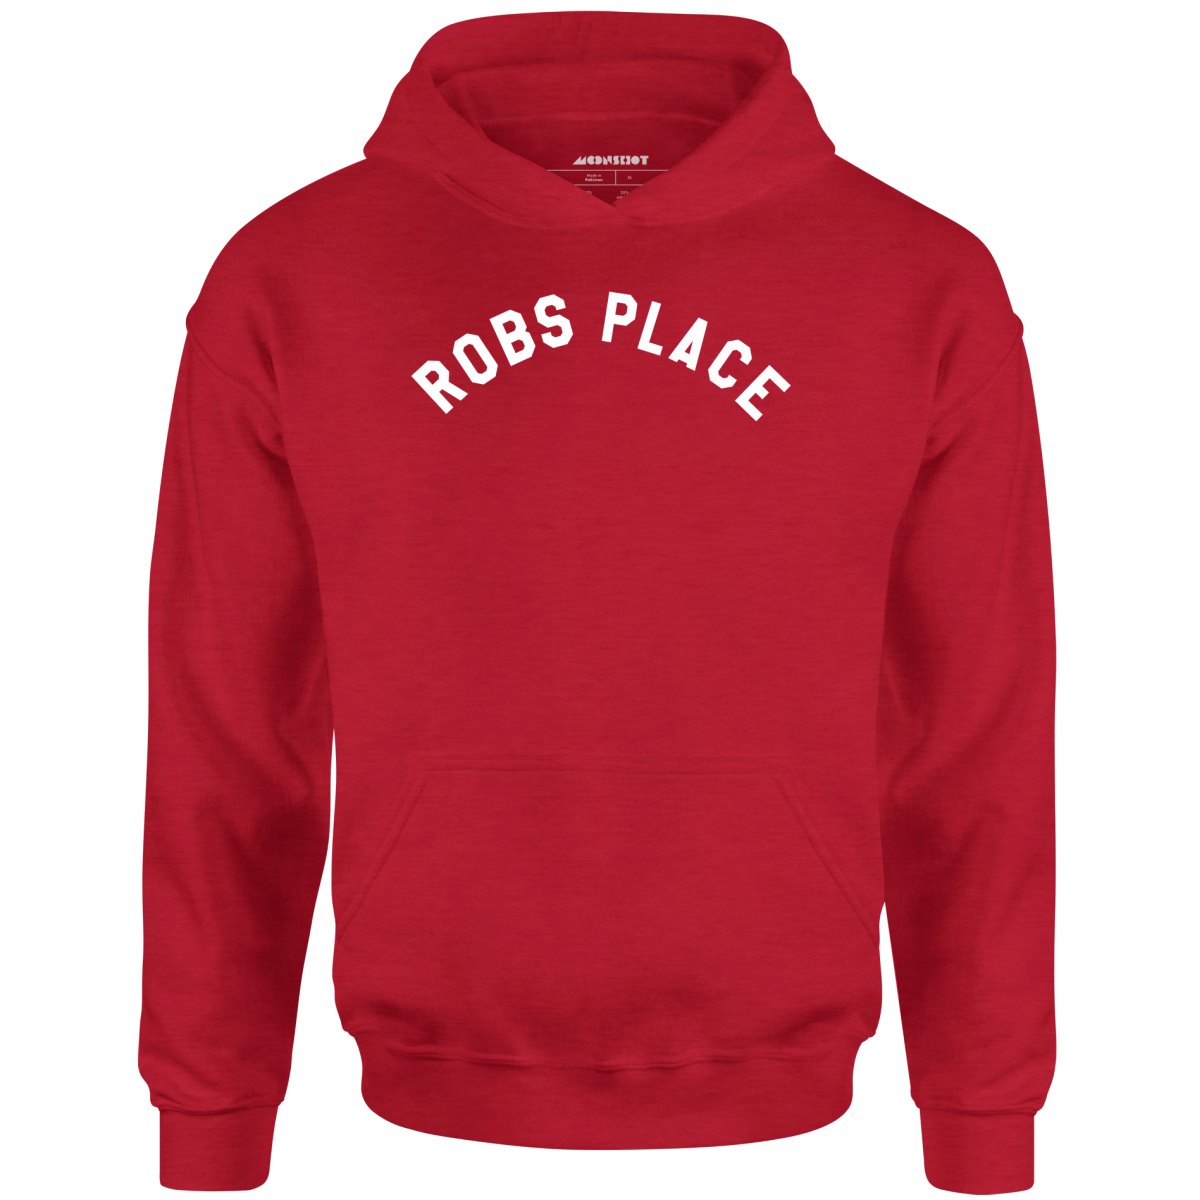 Rob's Place - Unisex Hoodie